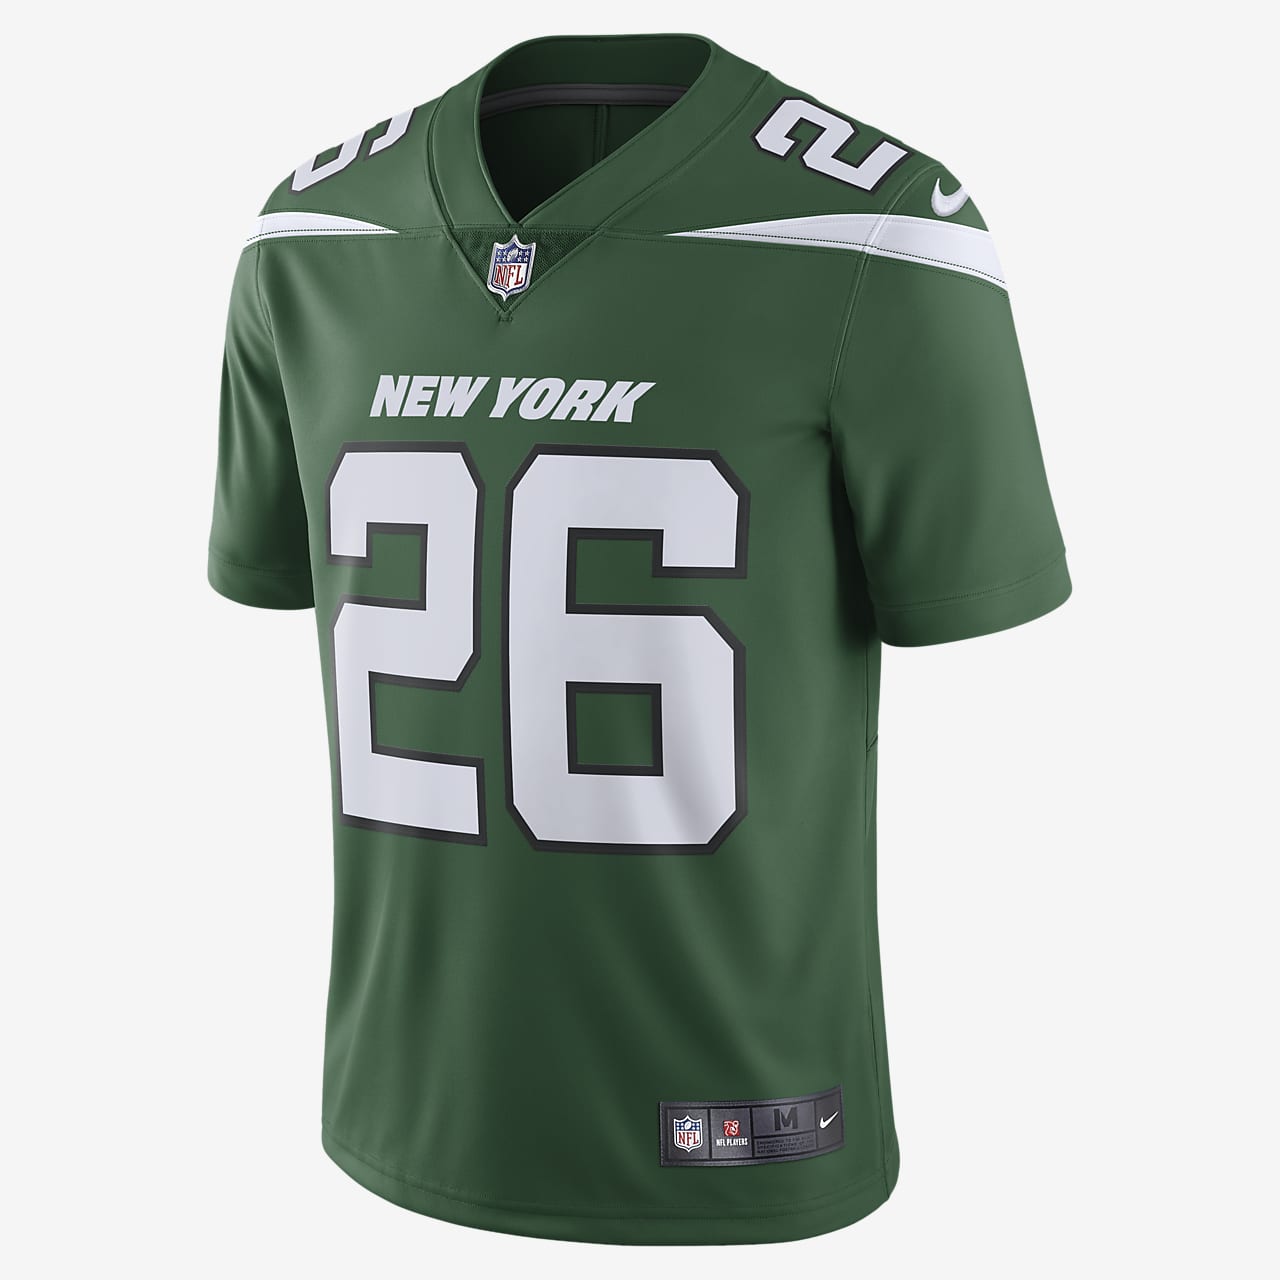 NFL New York Jets (Le'Veon Bell) Men's Limited Football Jersey